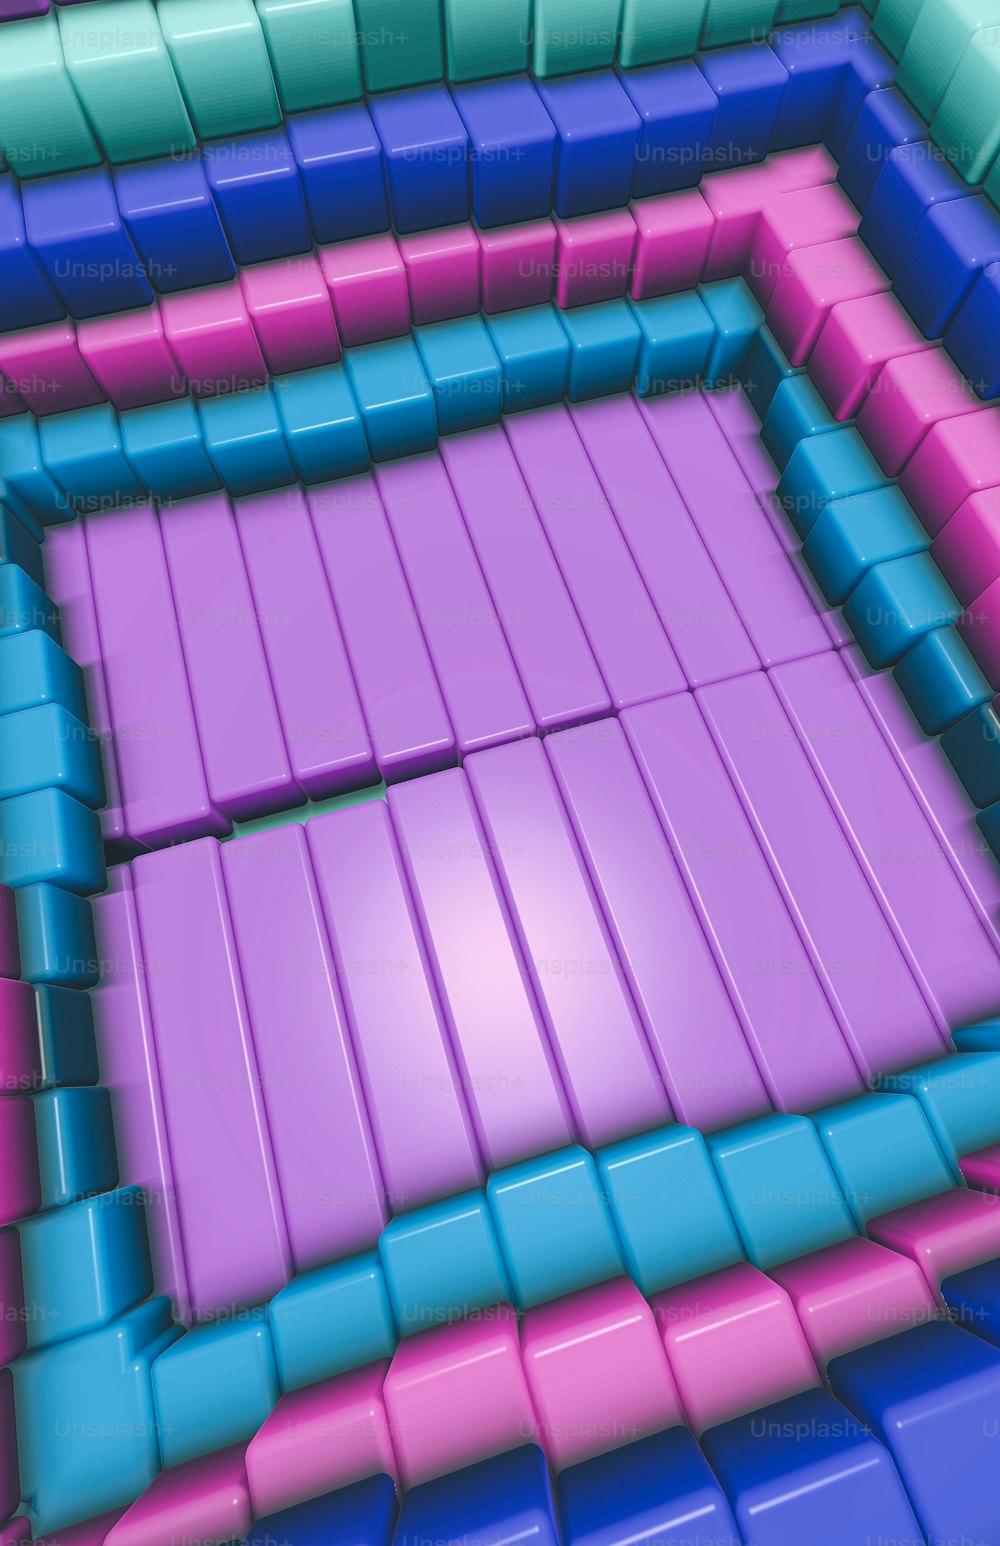 a 3d image of a purple, blue, and pink square